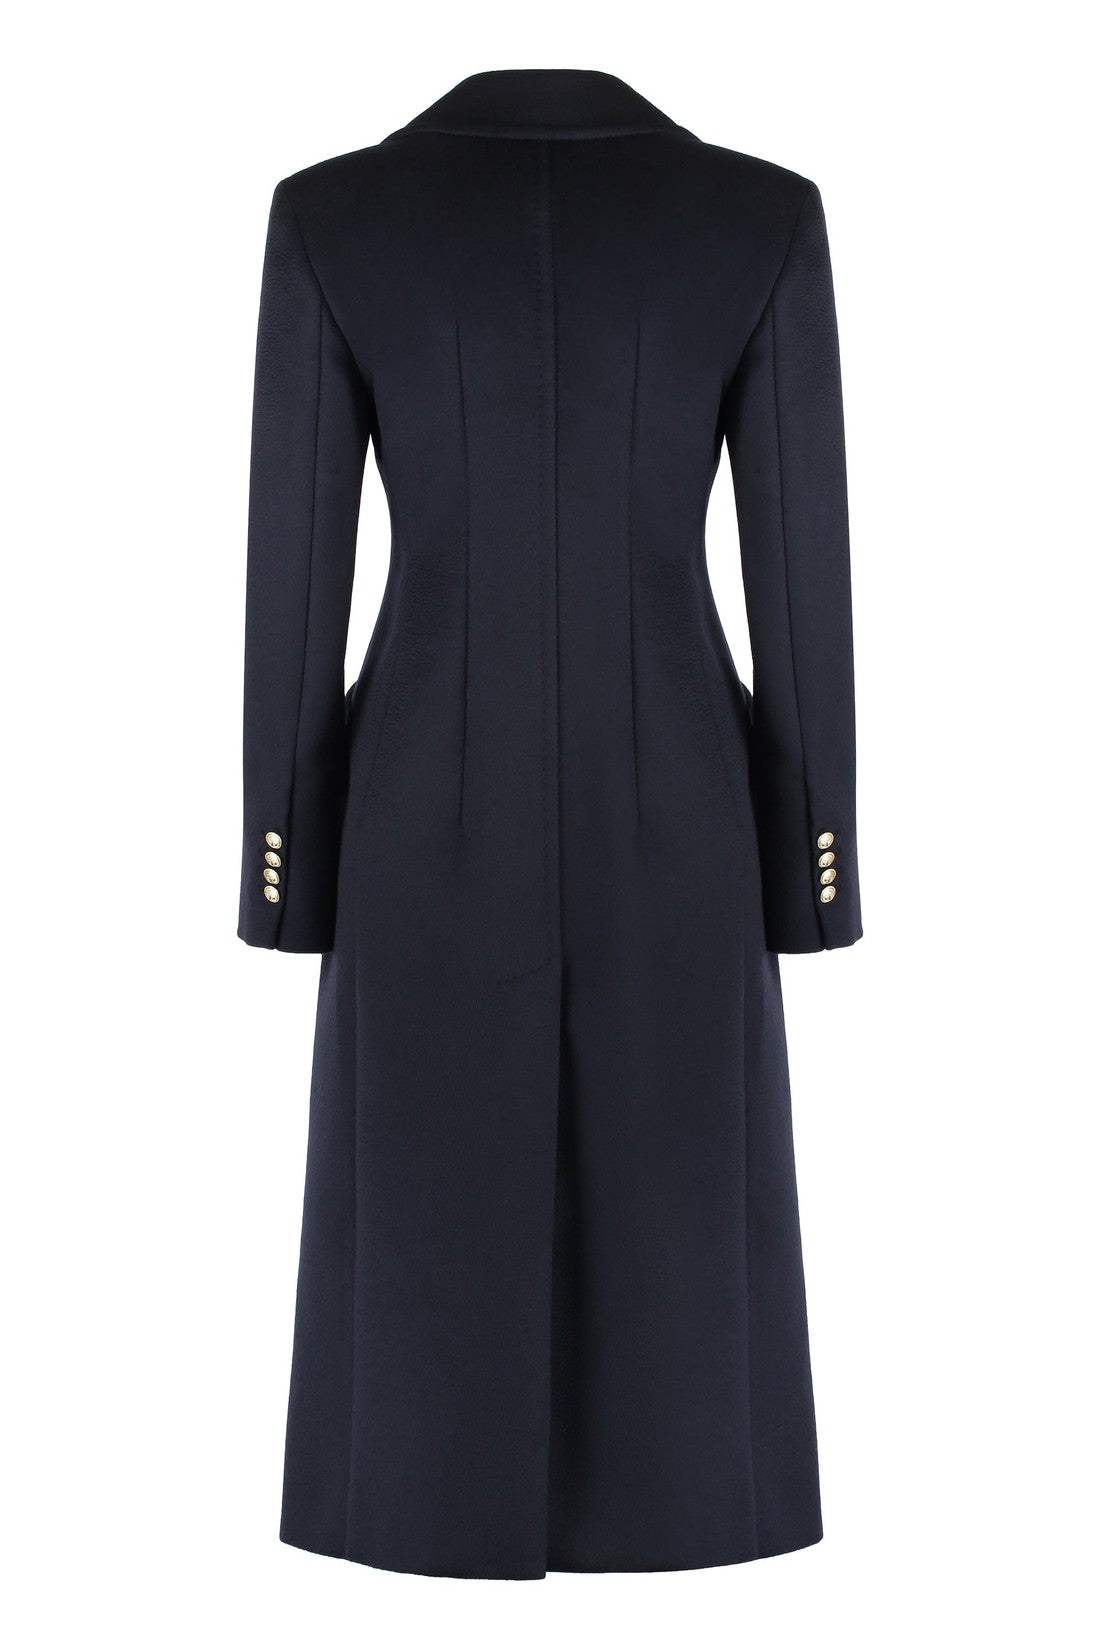 Max Mara Studio-OUTLET-SALE-Carabo double-breasted wool coat-ARCHIVIST